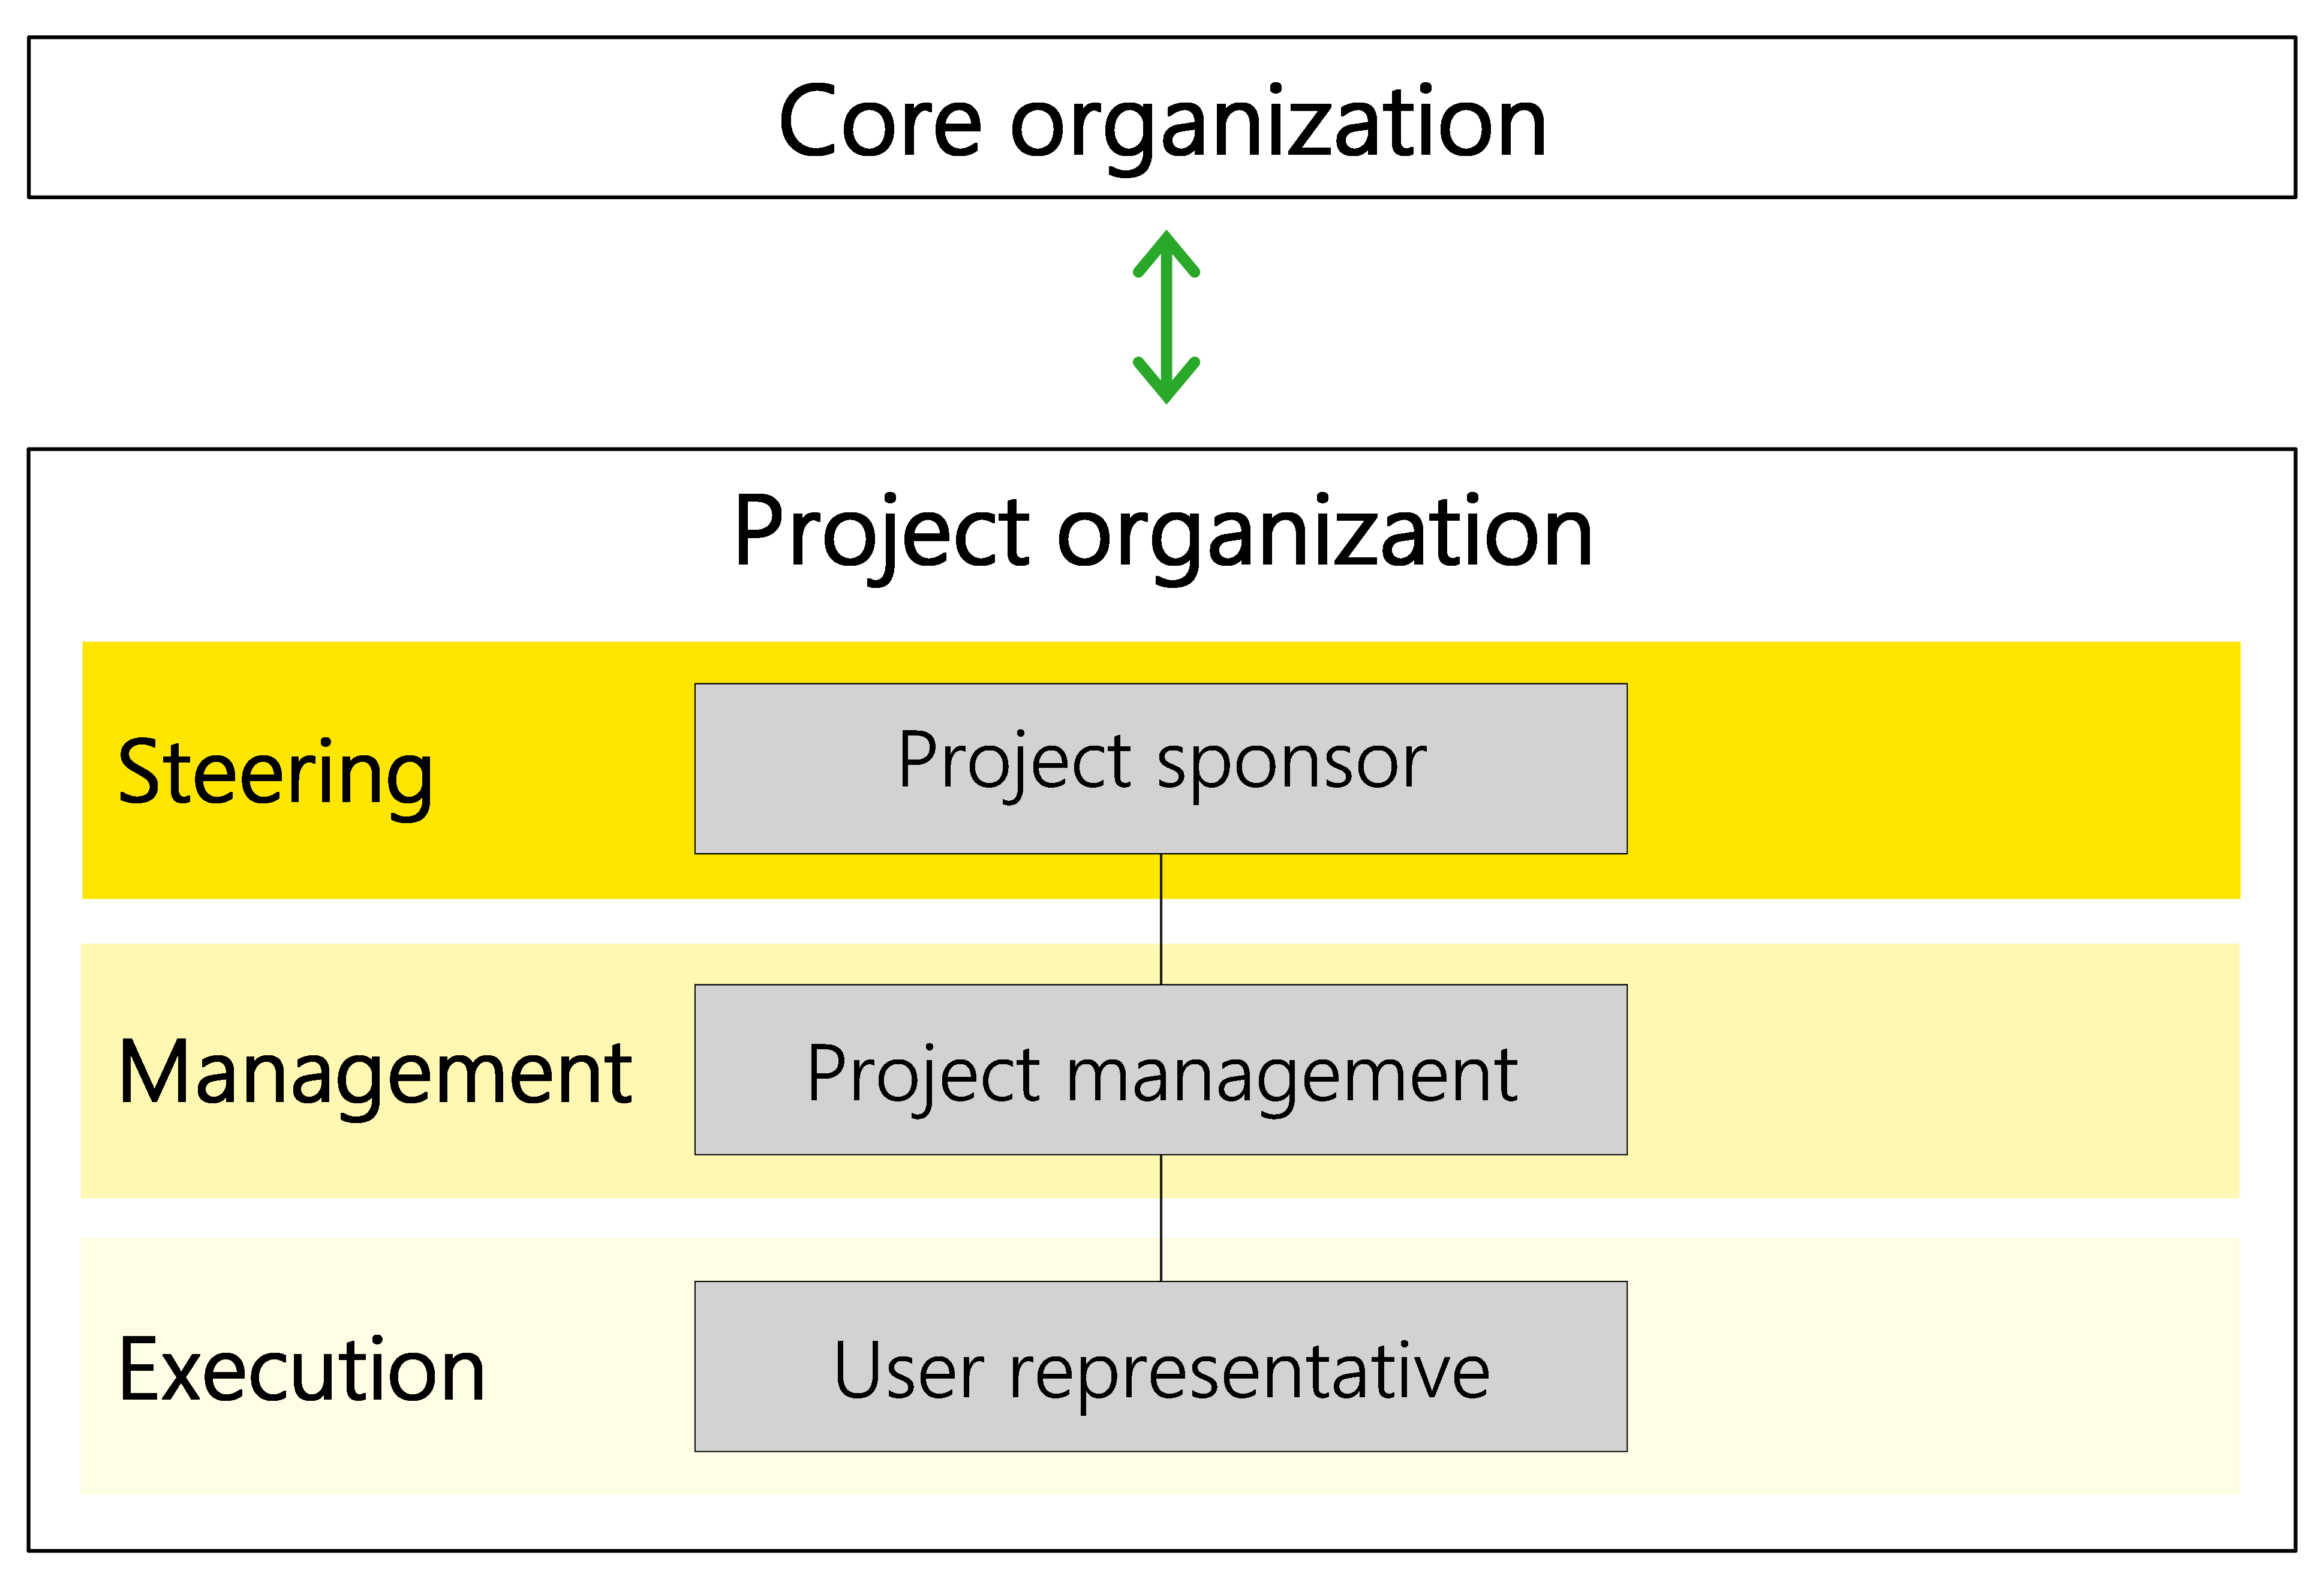 Figure 10: Minimum roles to be filled: project sponsor, project management, and user representative